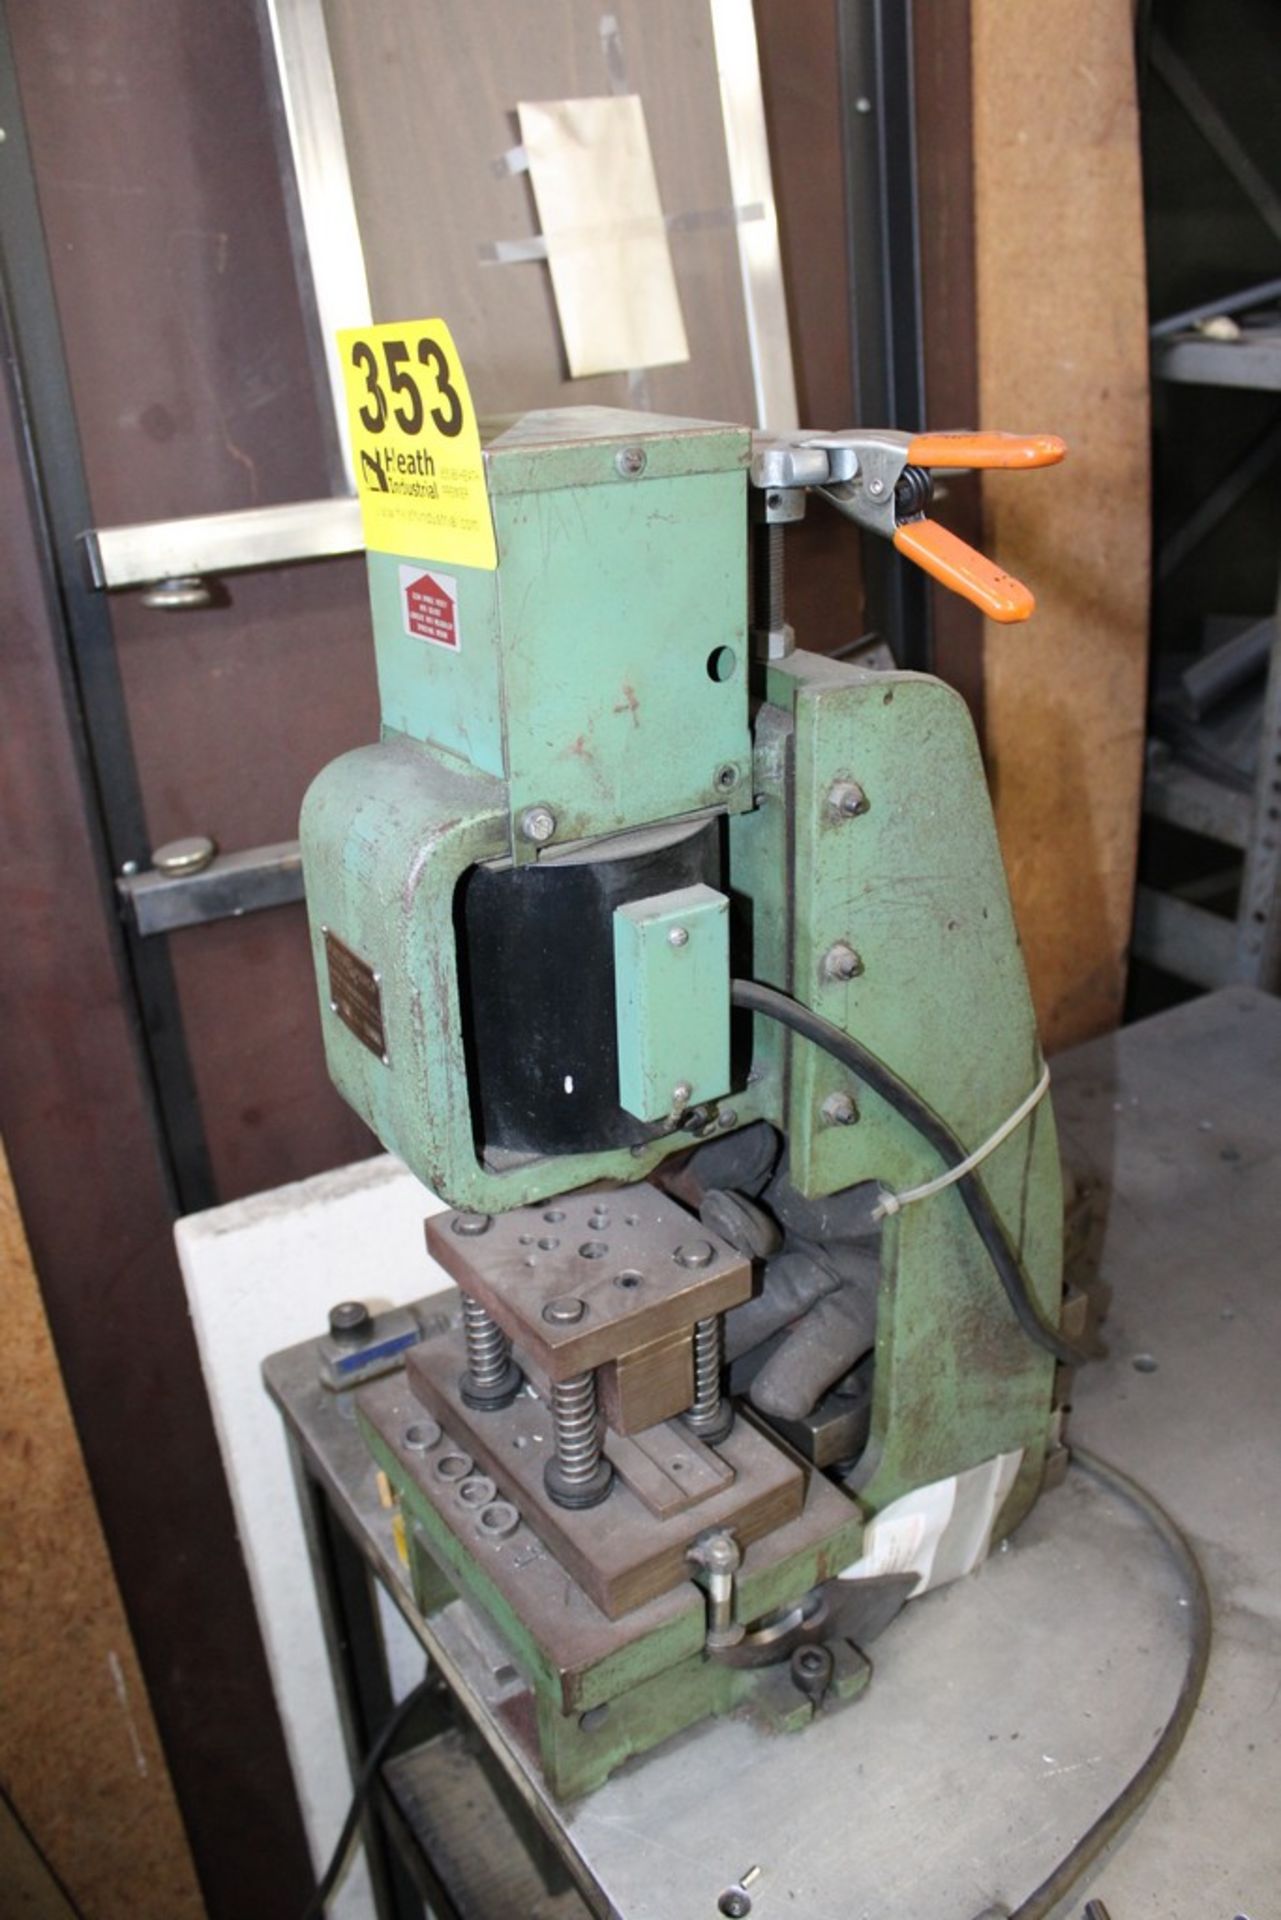 BLACK & WEBSTER ELECTROPUNCH MODEL C ELECTRIC IMPACT HAMMER, DUAL PALM BUTTON CONTROLS - Image 2 of 2